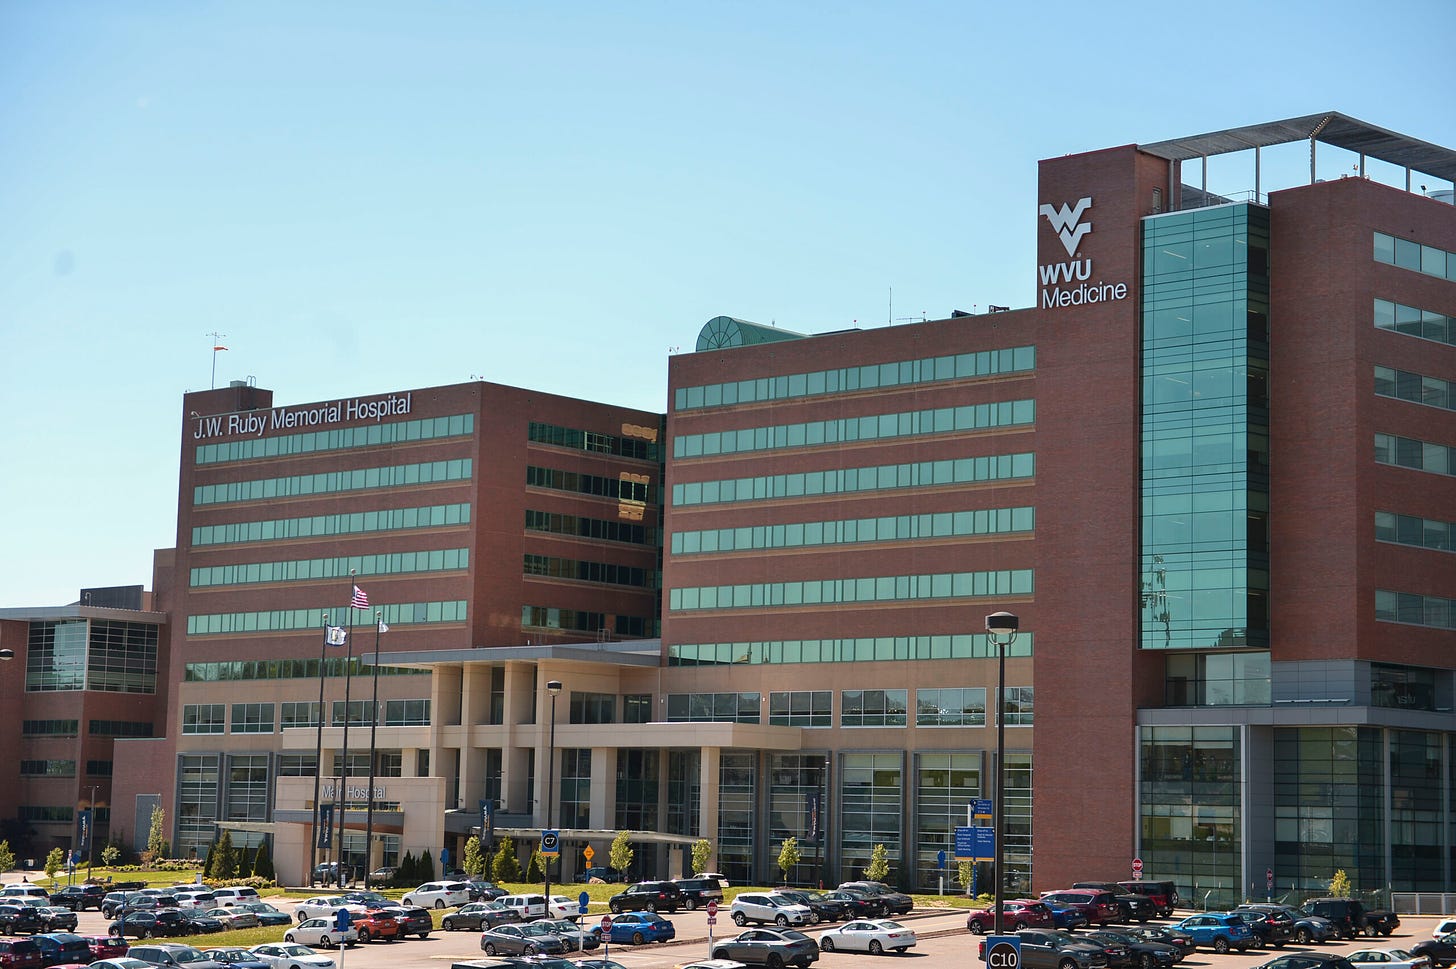 J.W. Ruby Memorial Hospital top hospital in the state – Dominion Post